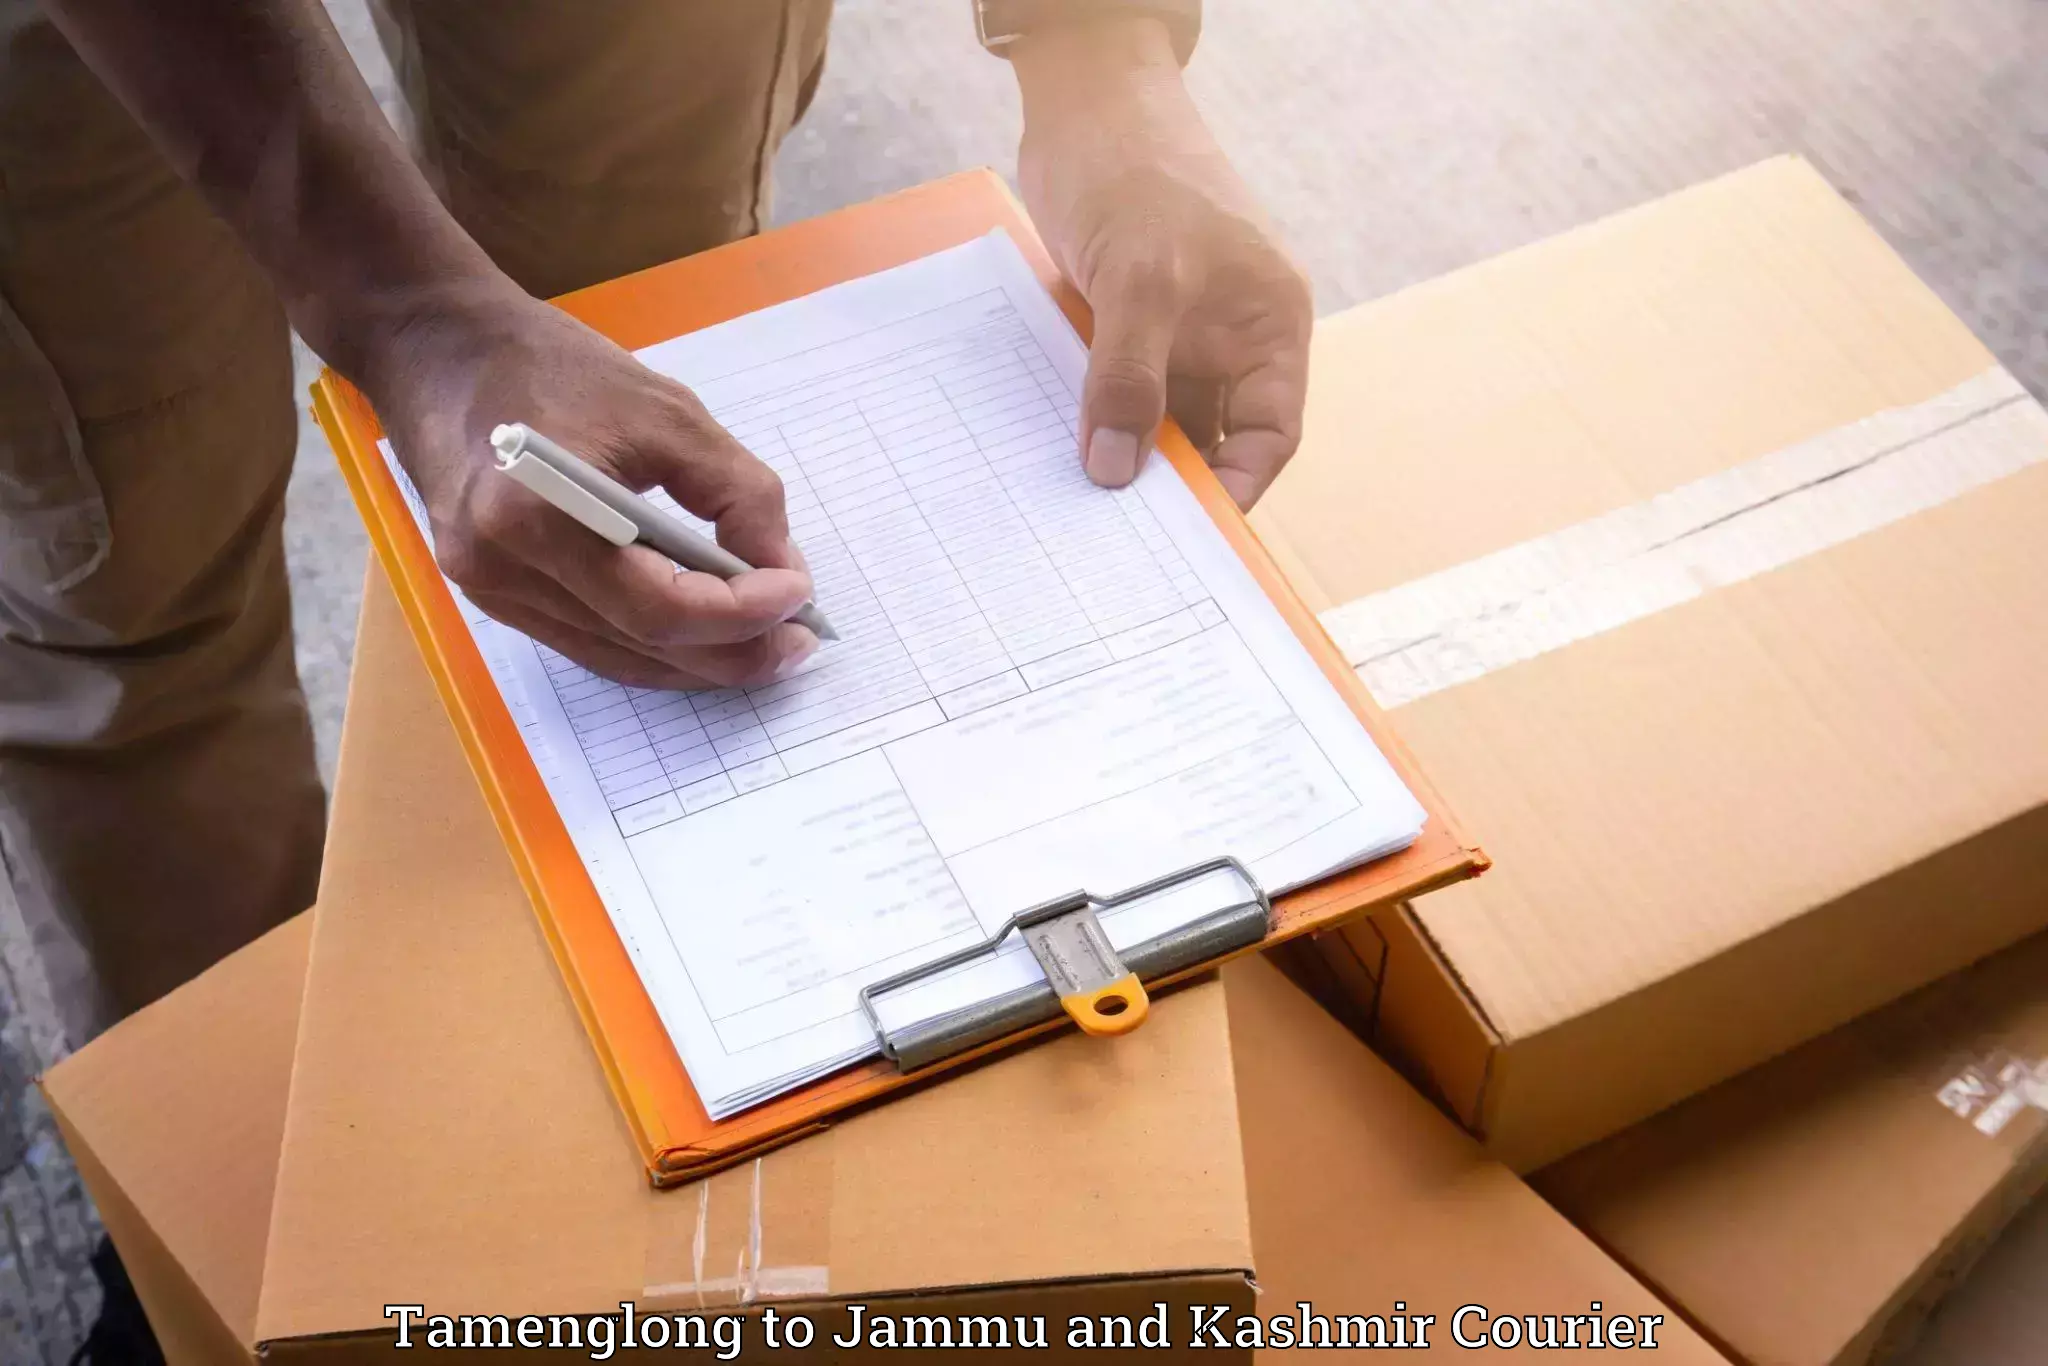 Quality moving company Tamenglong to Udhampur